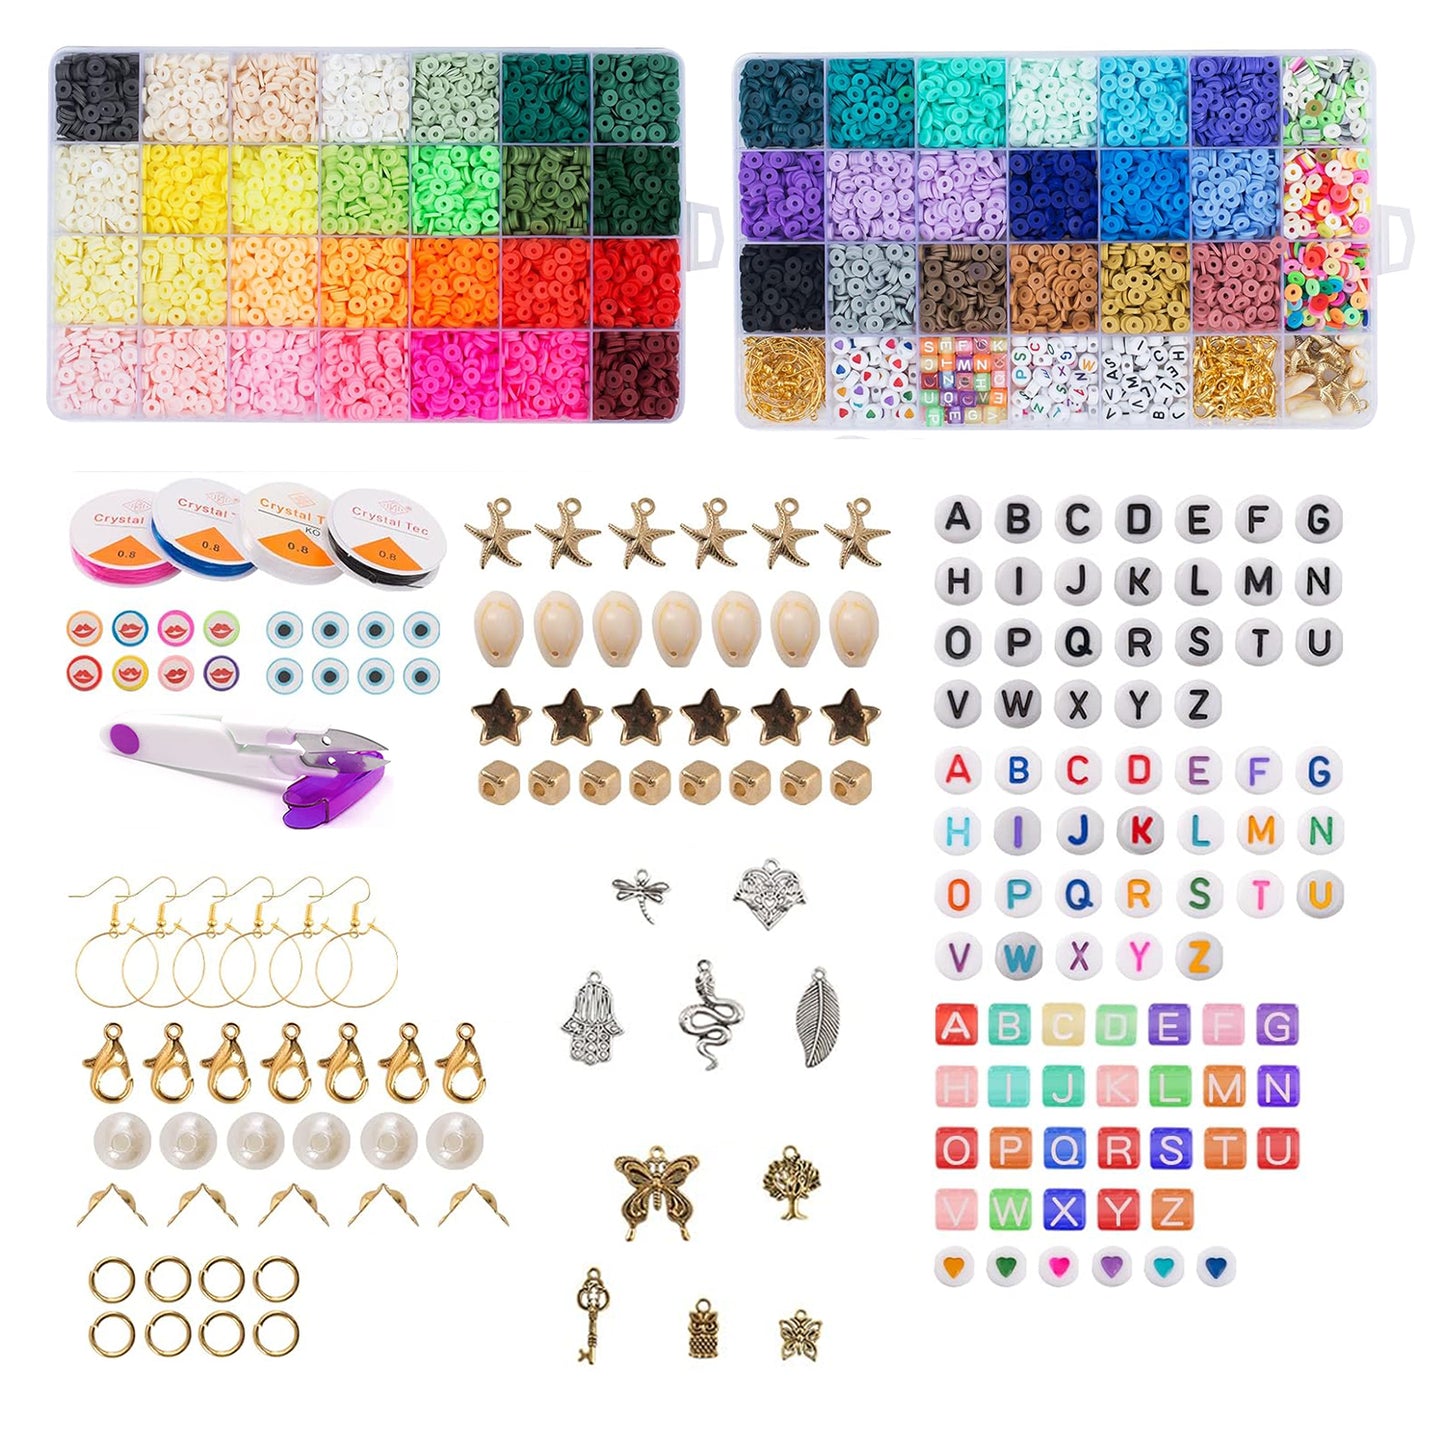 12000+ Clay Beads Friendship Bracelet Making Kit, Flat Preppy Polymer Heirship Beads for Jewelry Making with Pendant Charms for Girls Teens Ages 6-12